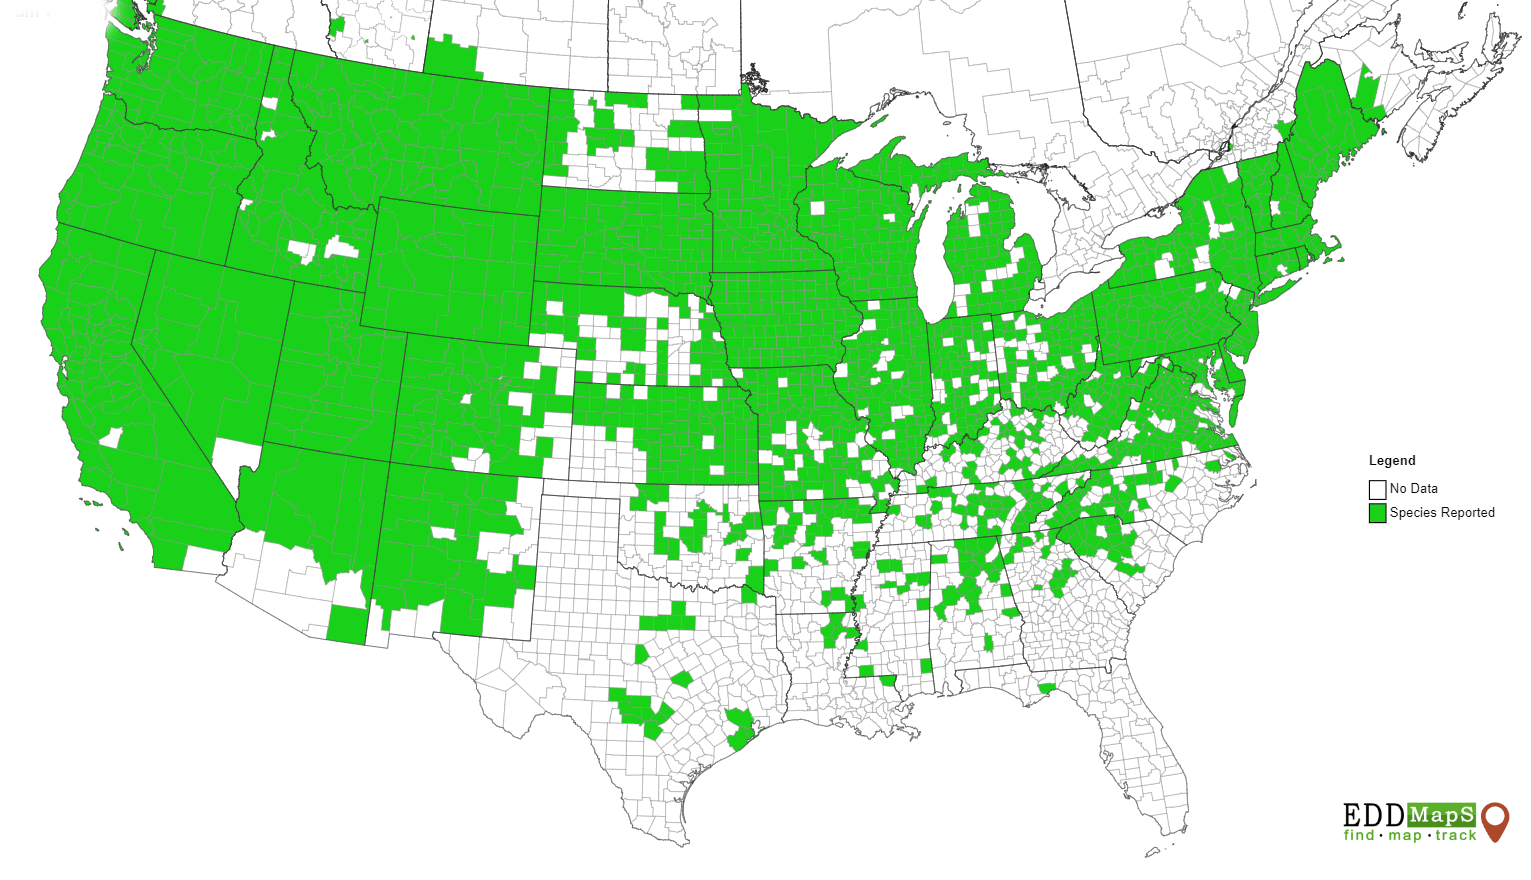 Bull thistle distribution in the lower 48 states. Map courtesy EddMapS.com